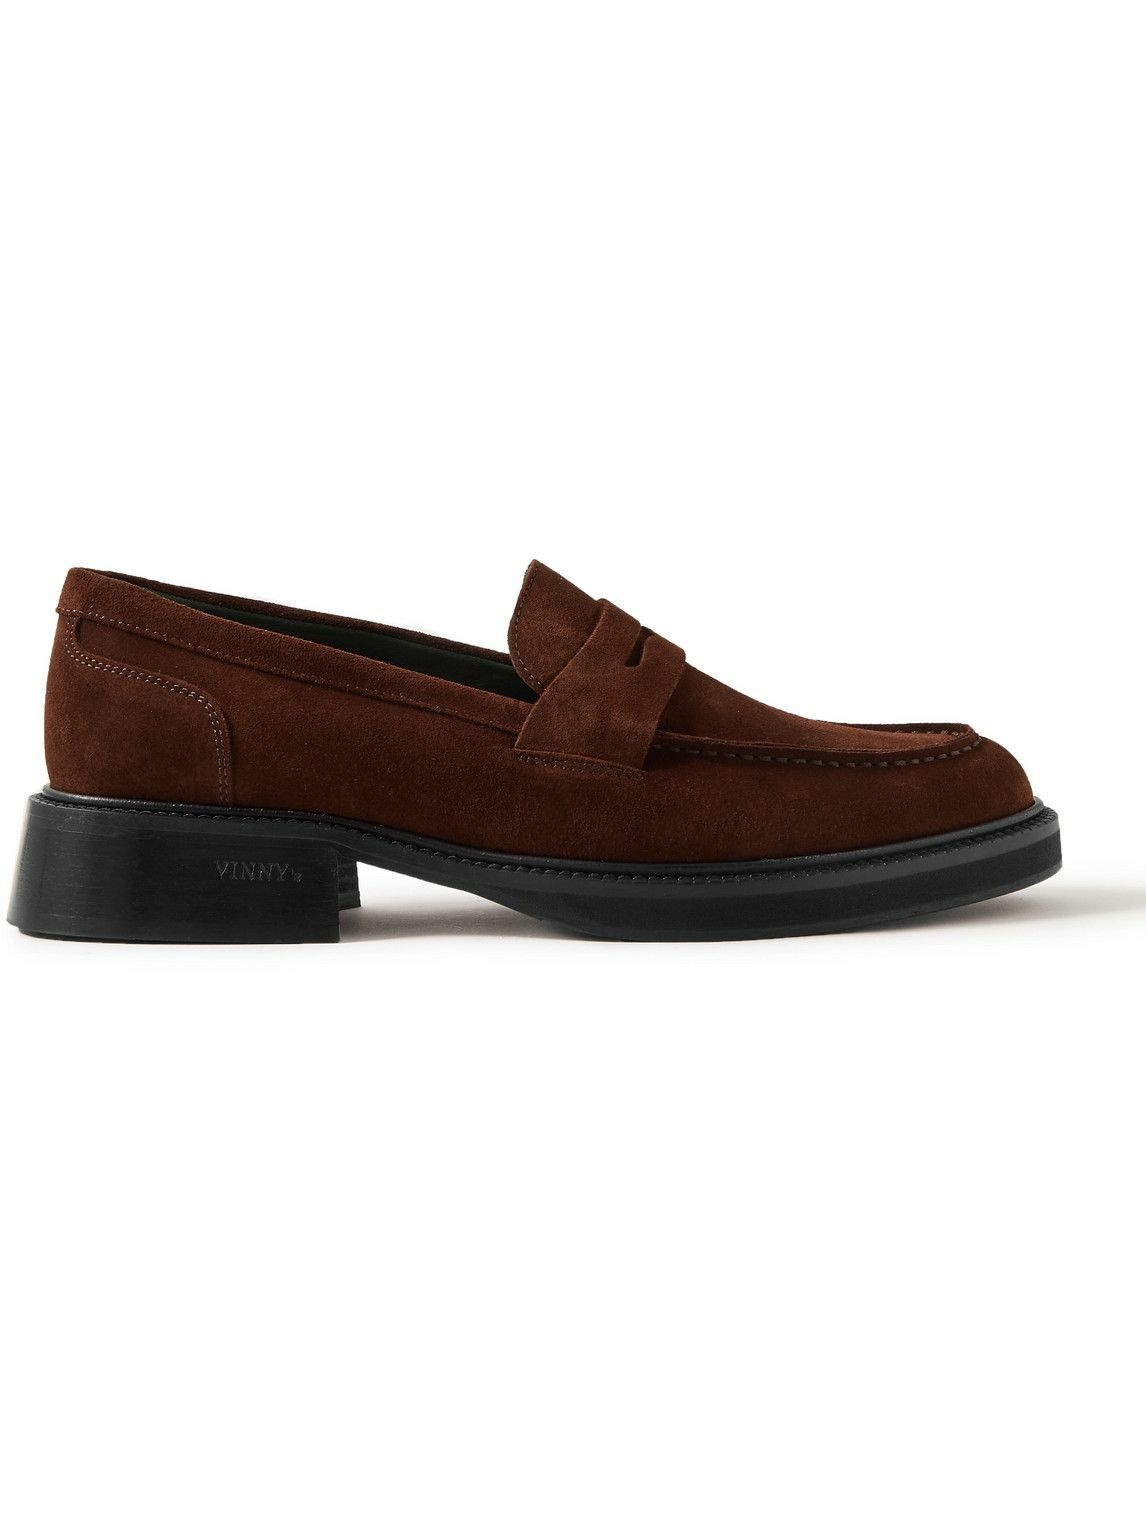 Photo: VINNY's - Heeled Townee Suede Penny Loafers - Brown